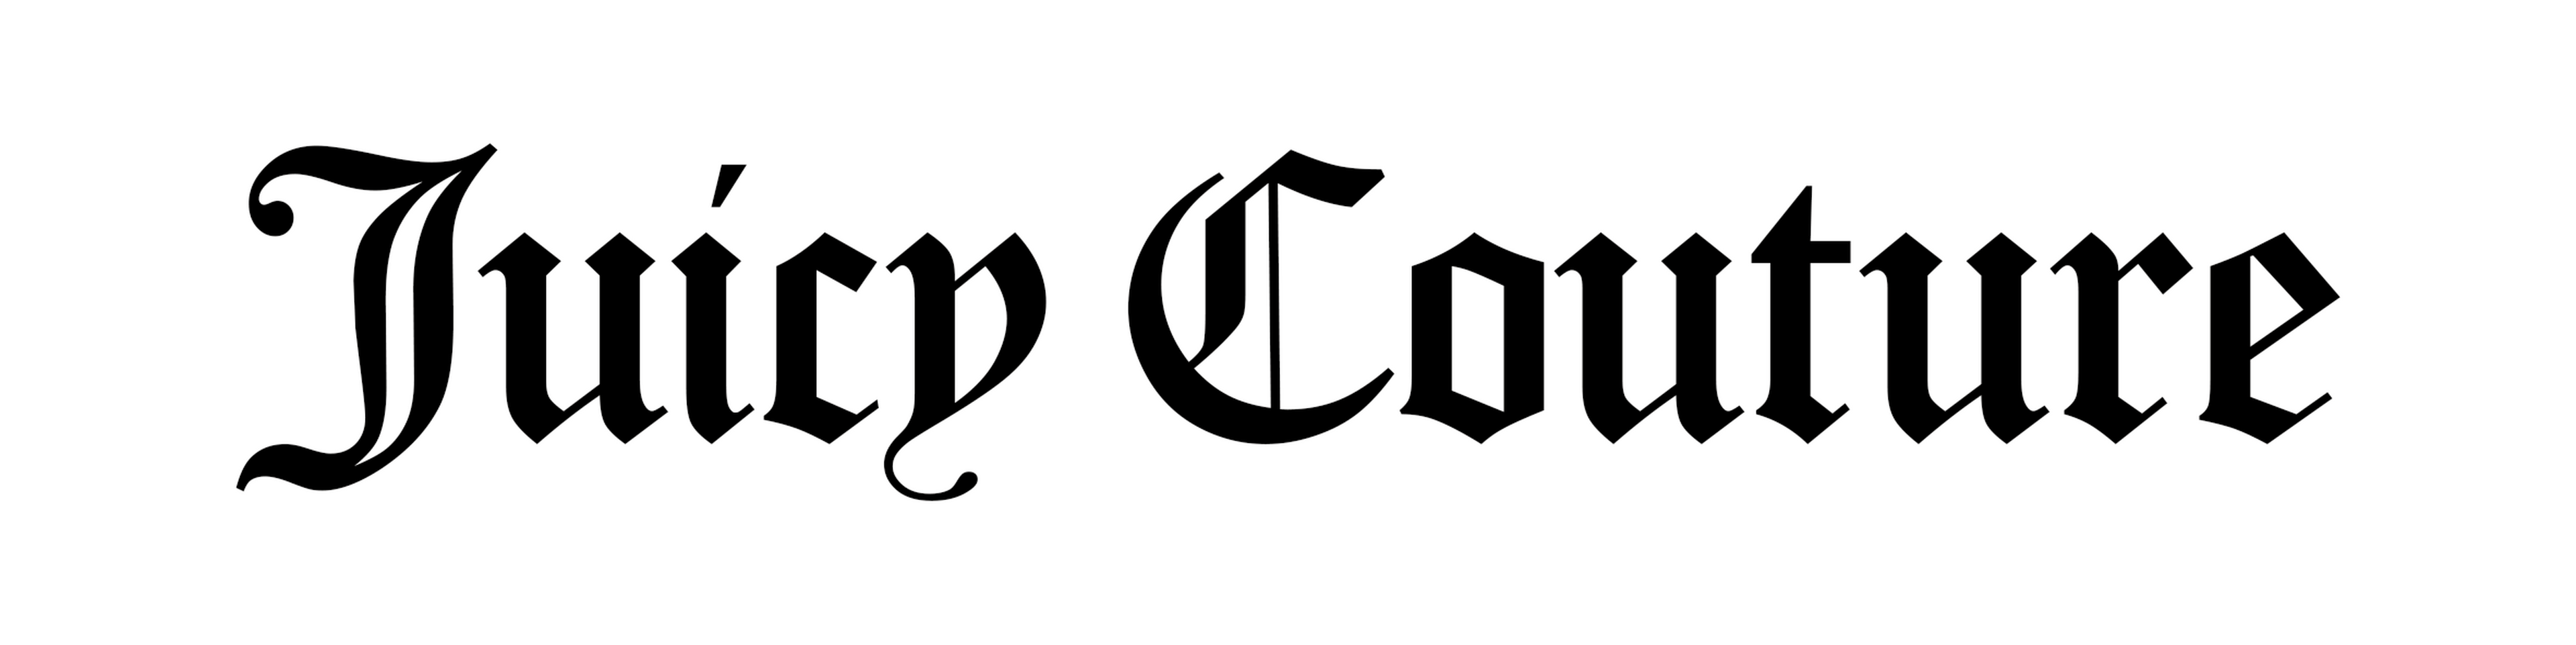 Juicy Couture logotype